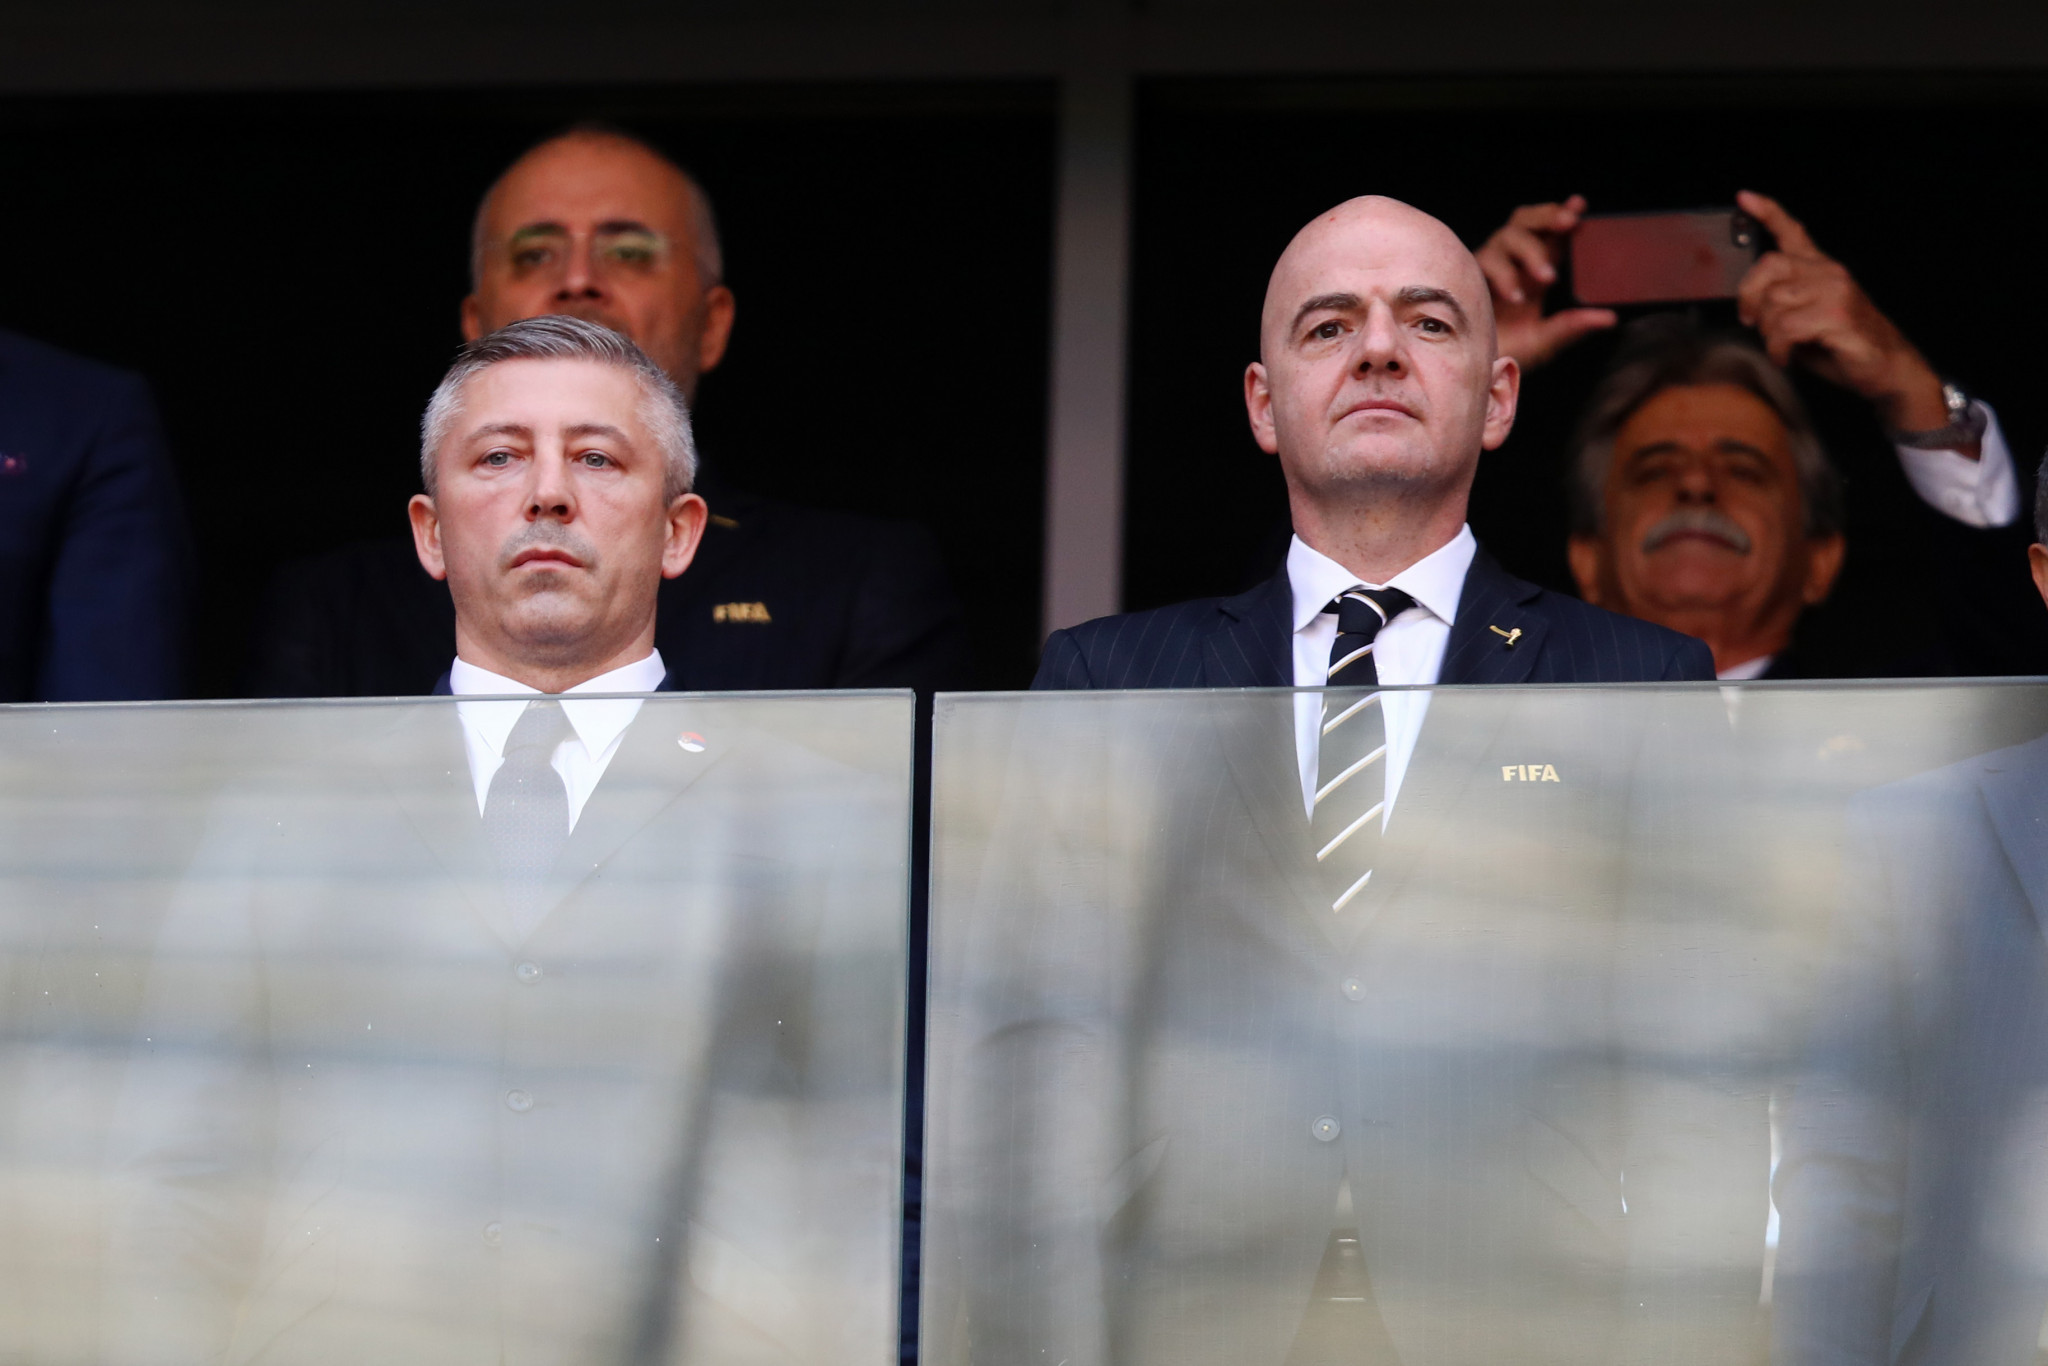 Slaviša Kokeza, left, pictured with FIFA President Gianni Infantino, has resigned as Football Association of Serbia President ©Getty Images